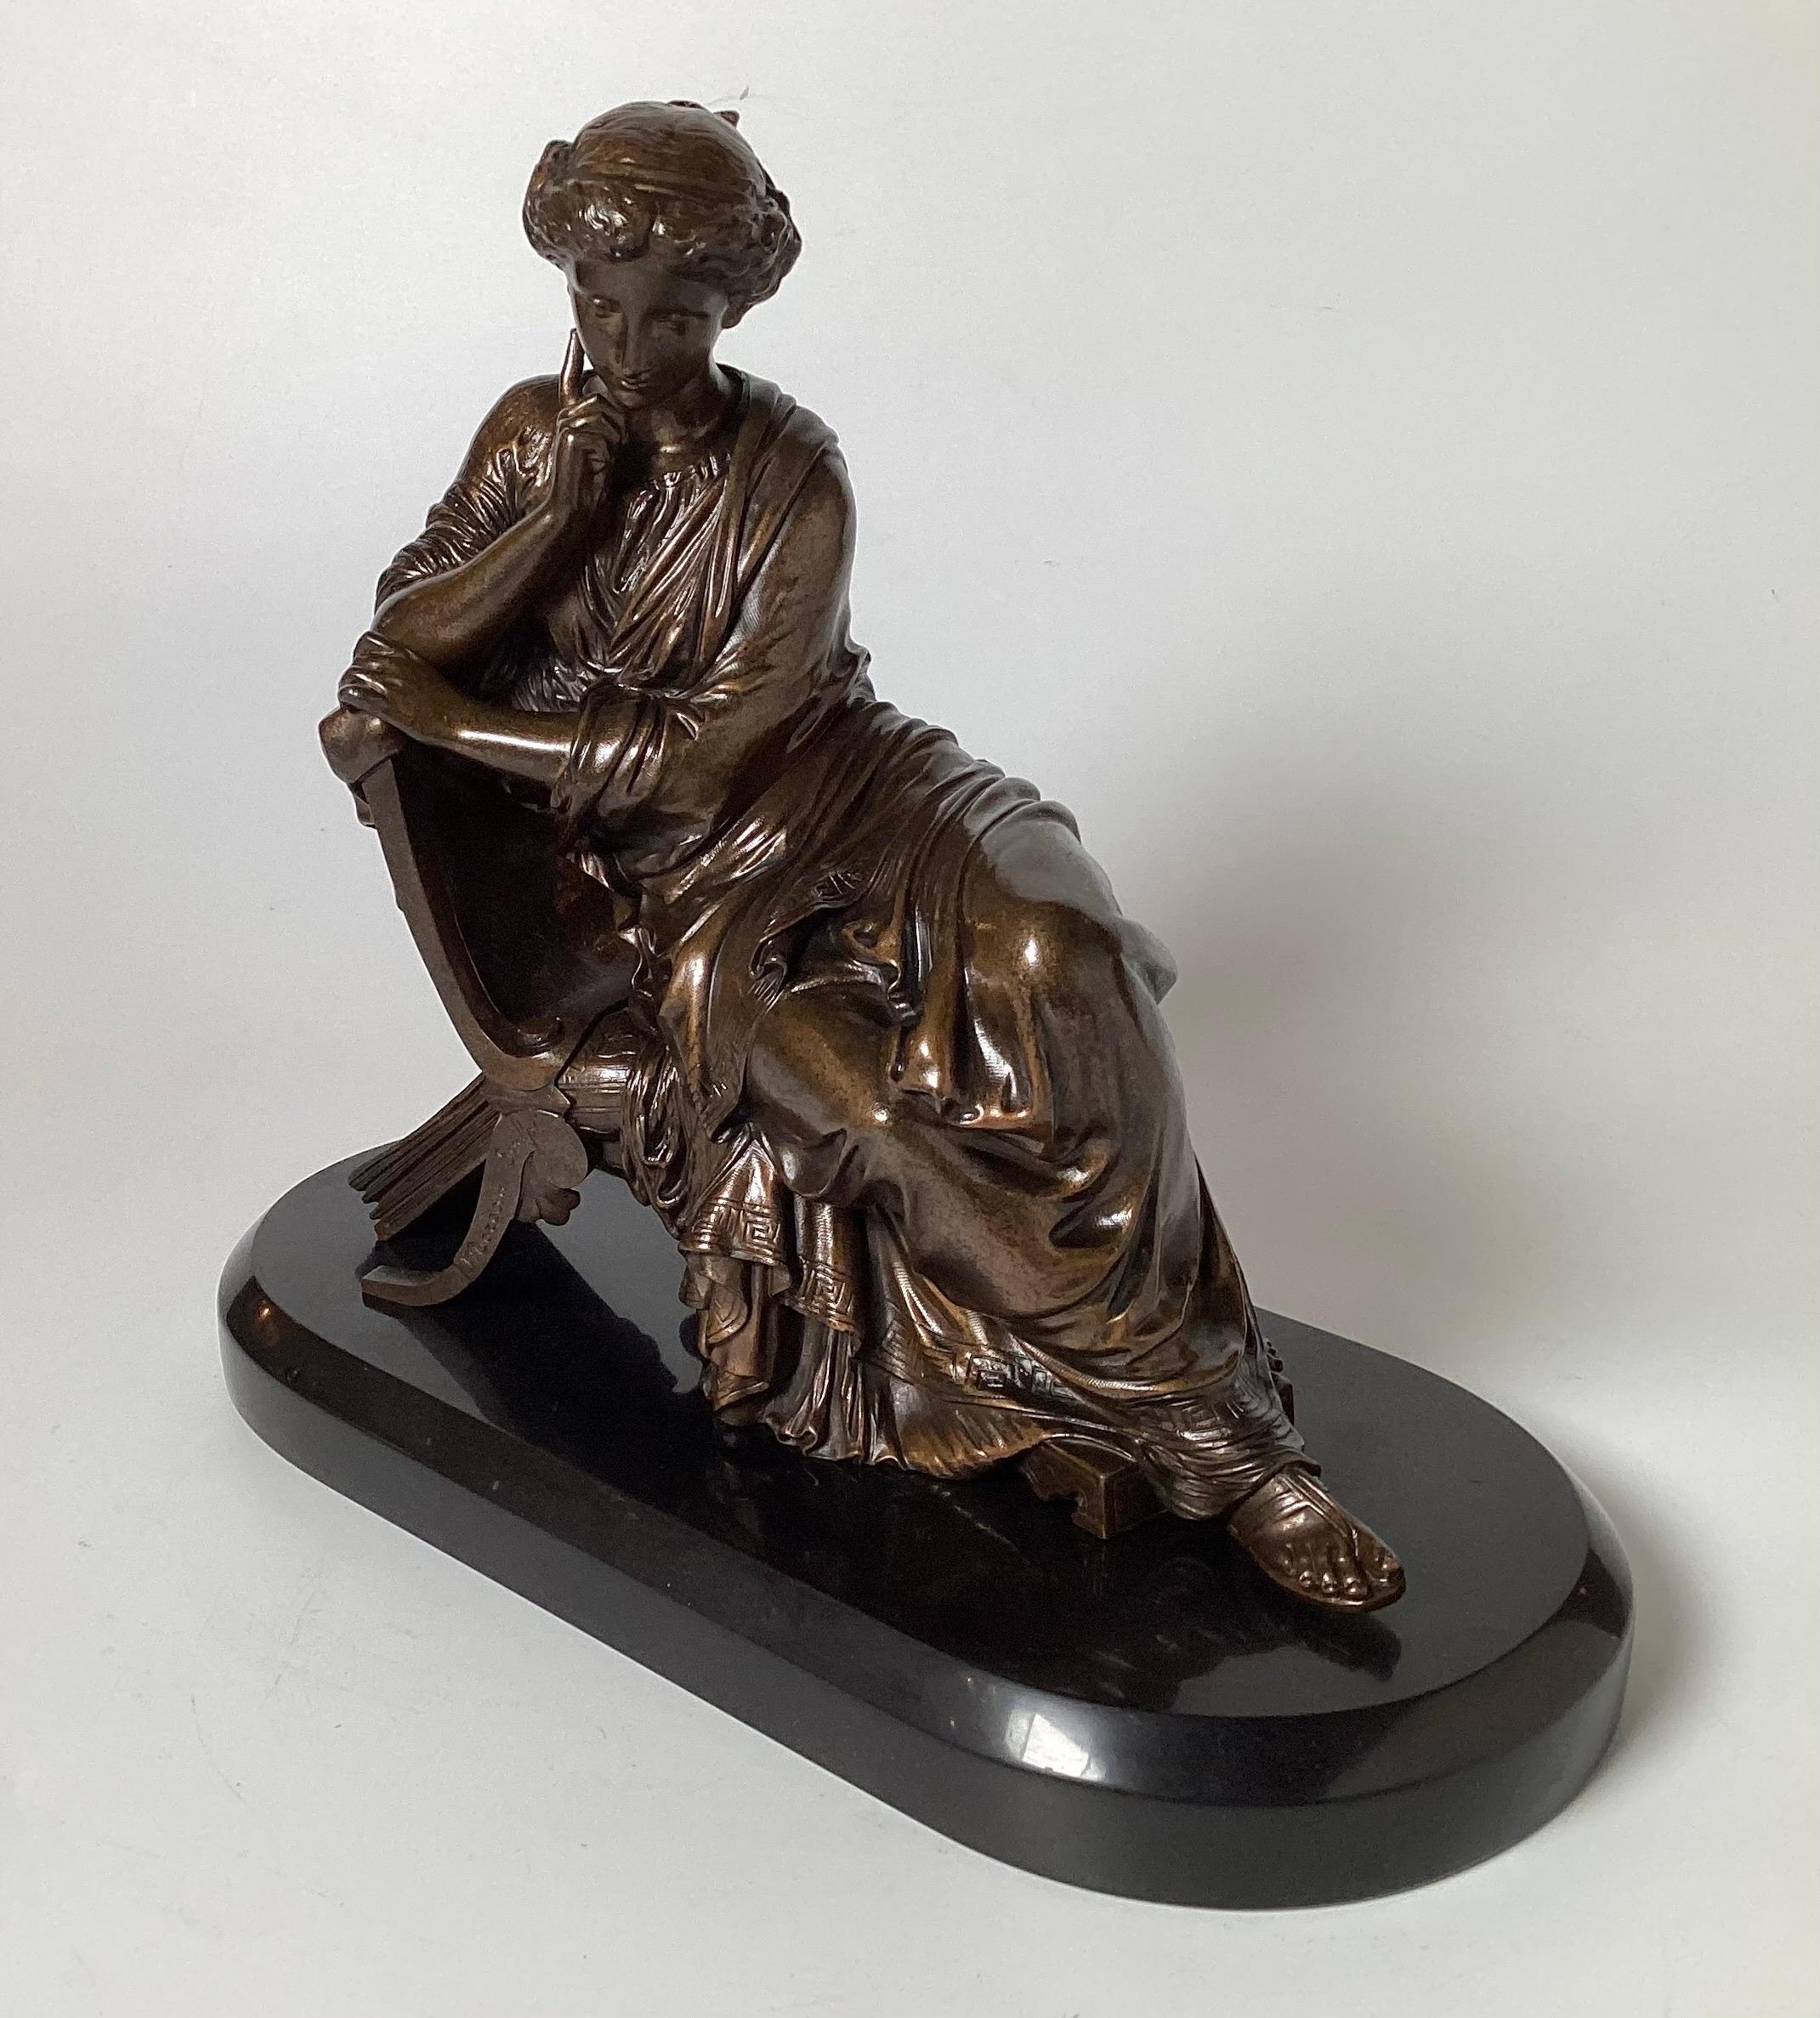 Bronze statue with dark colored patination featuring a seated classical lady after James Pradier (1790-1852). She is set on an oval polished slate marble base. This bronze is inspired by Sappho, a marble statue realized by Pradier in 1852, which is